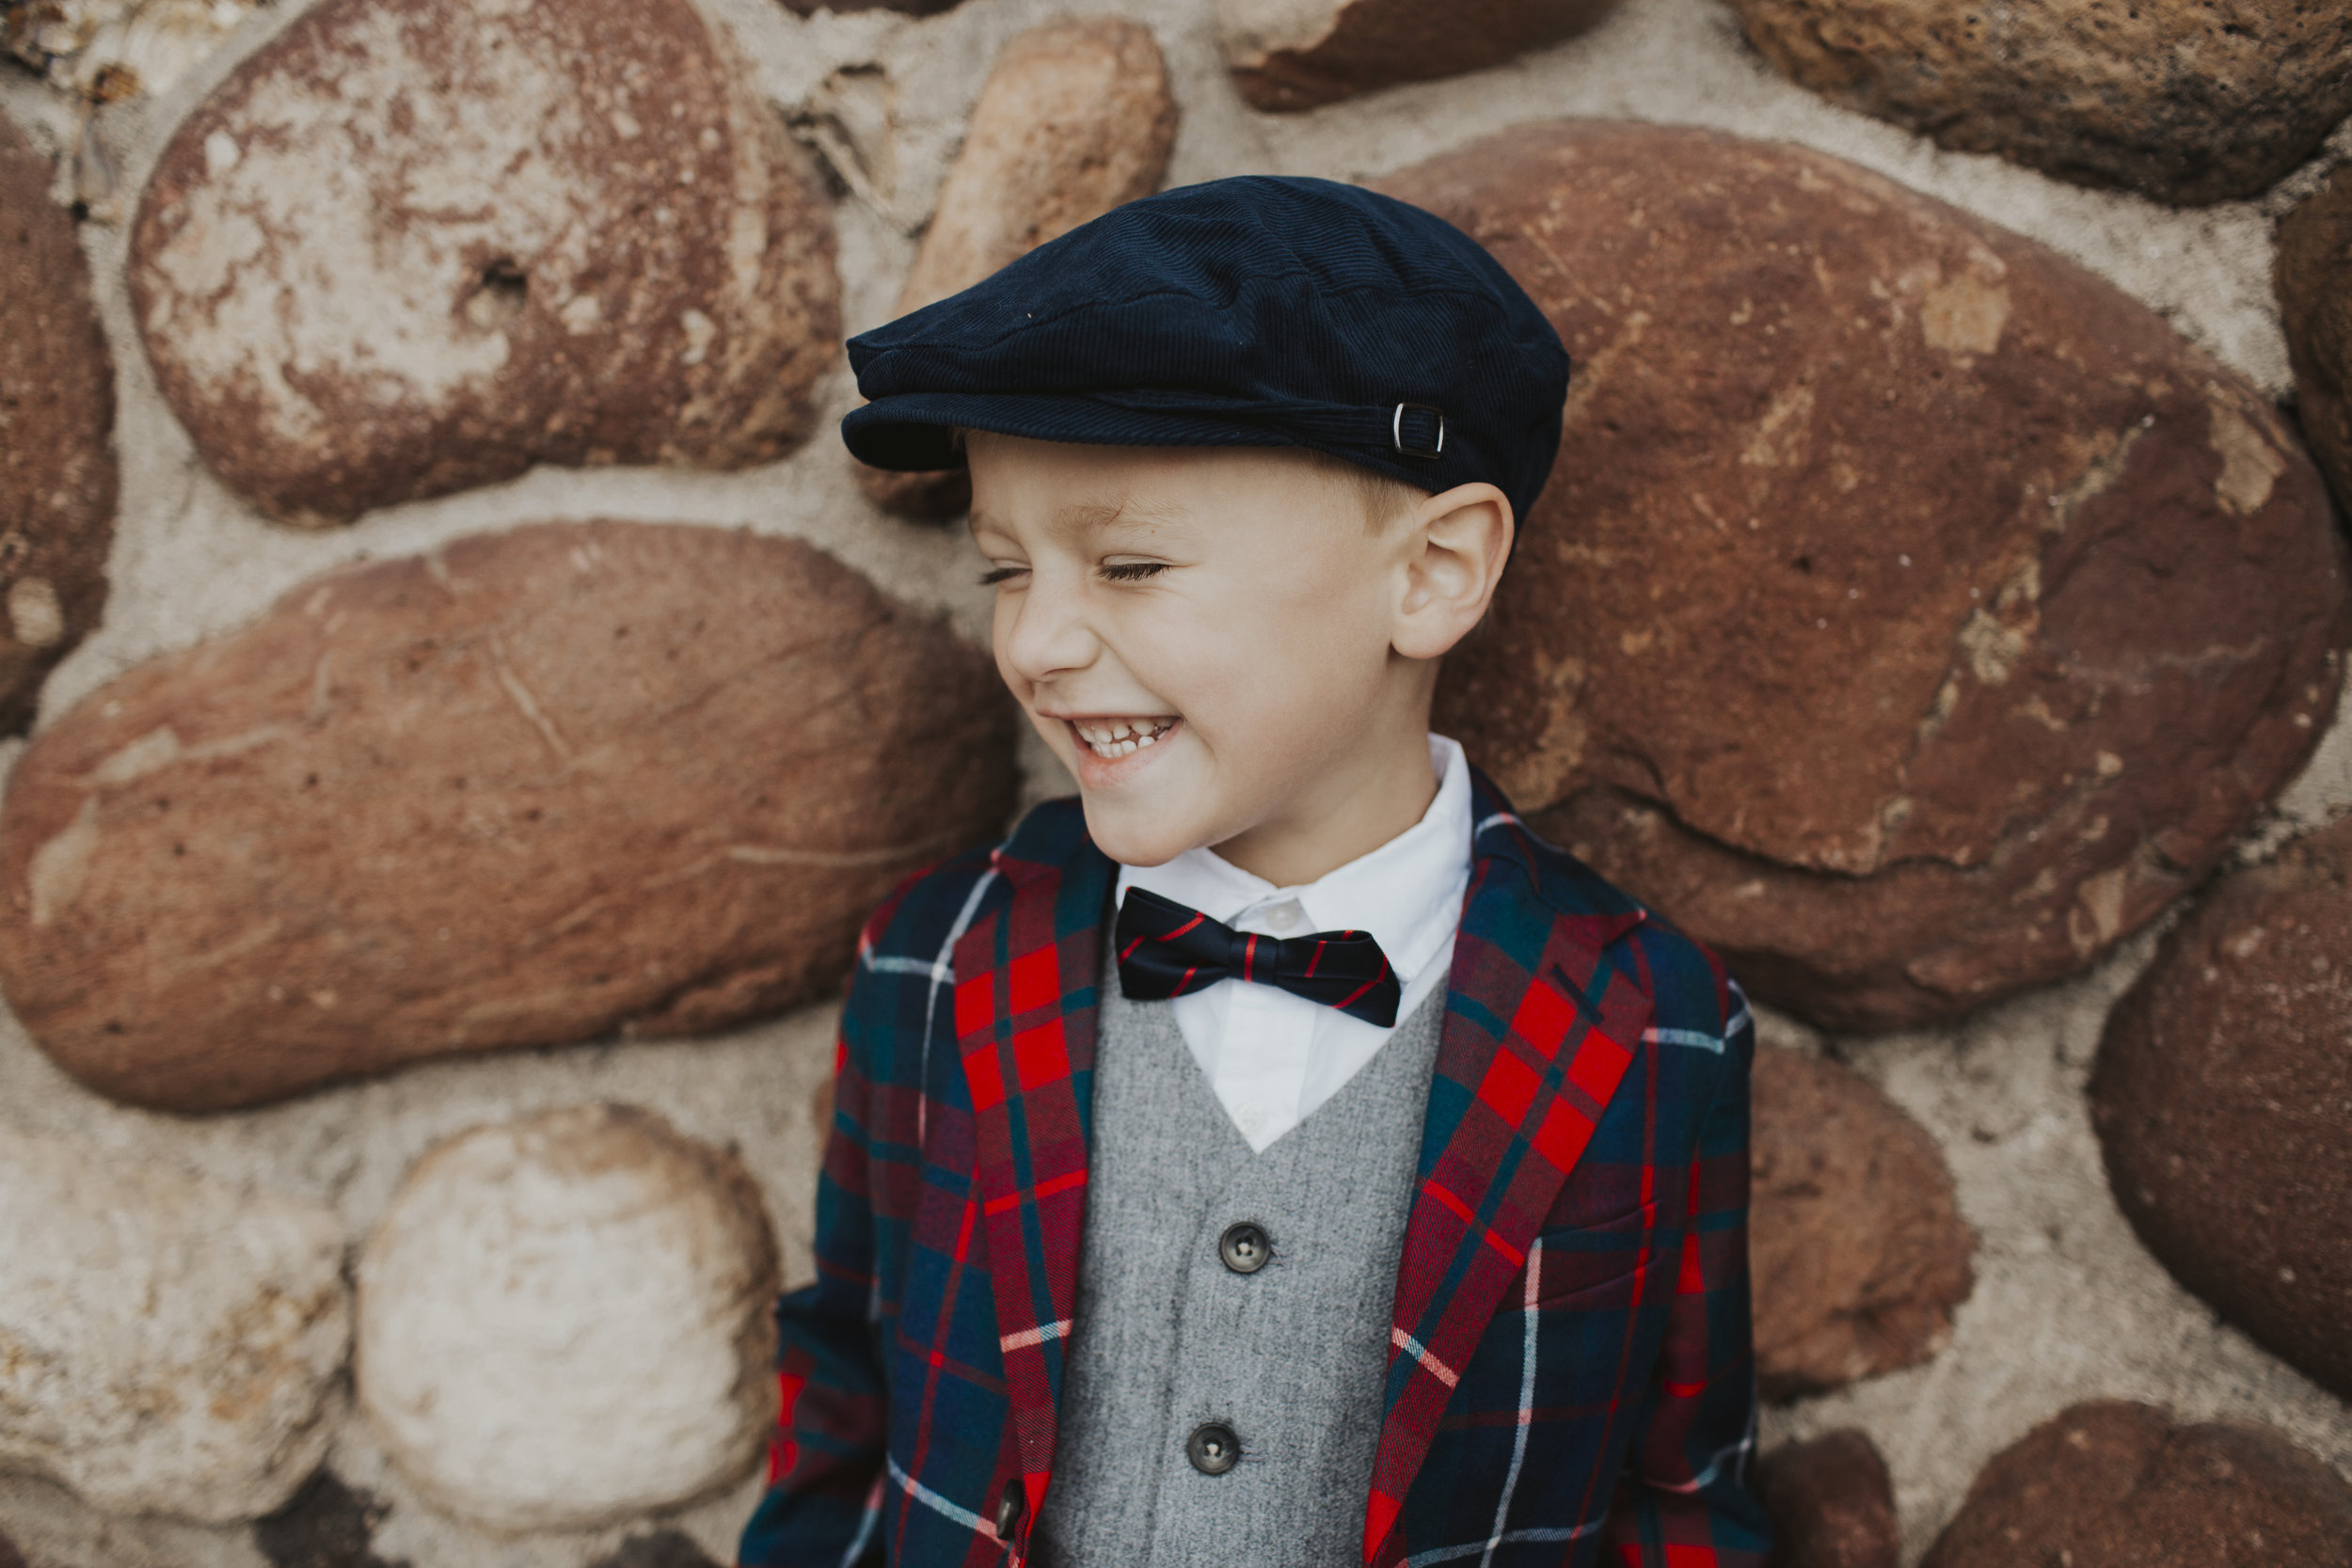 7 Ideas to make your Holidays Special with Janie + Jack in Dapper Style